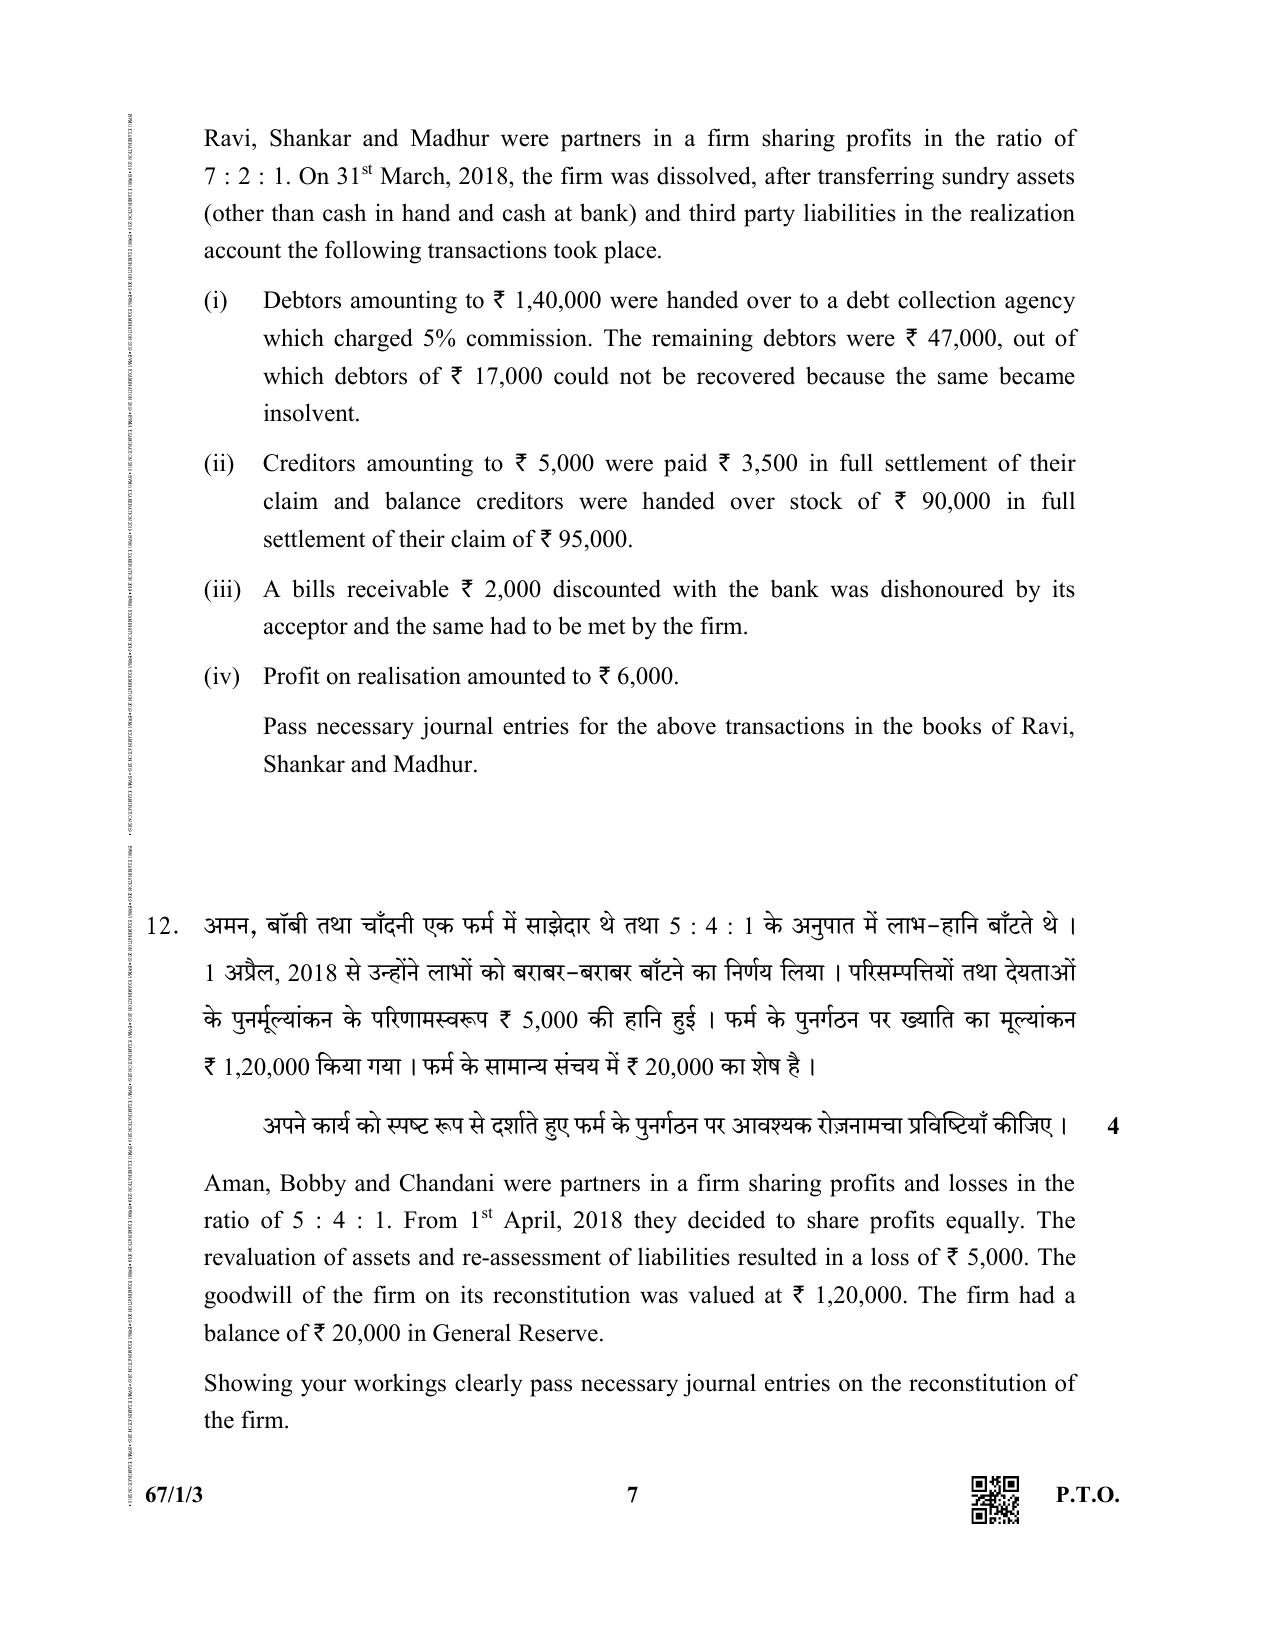 CBSE Class 12 67-1-3  (Accountancy) 2019 Question Paper - Page 7